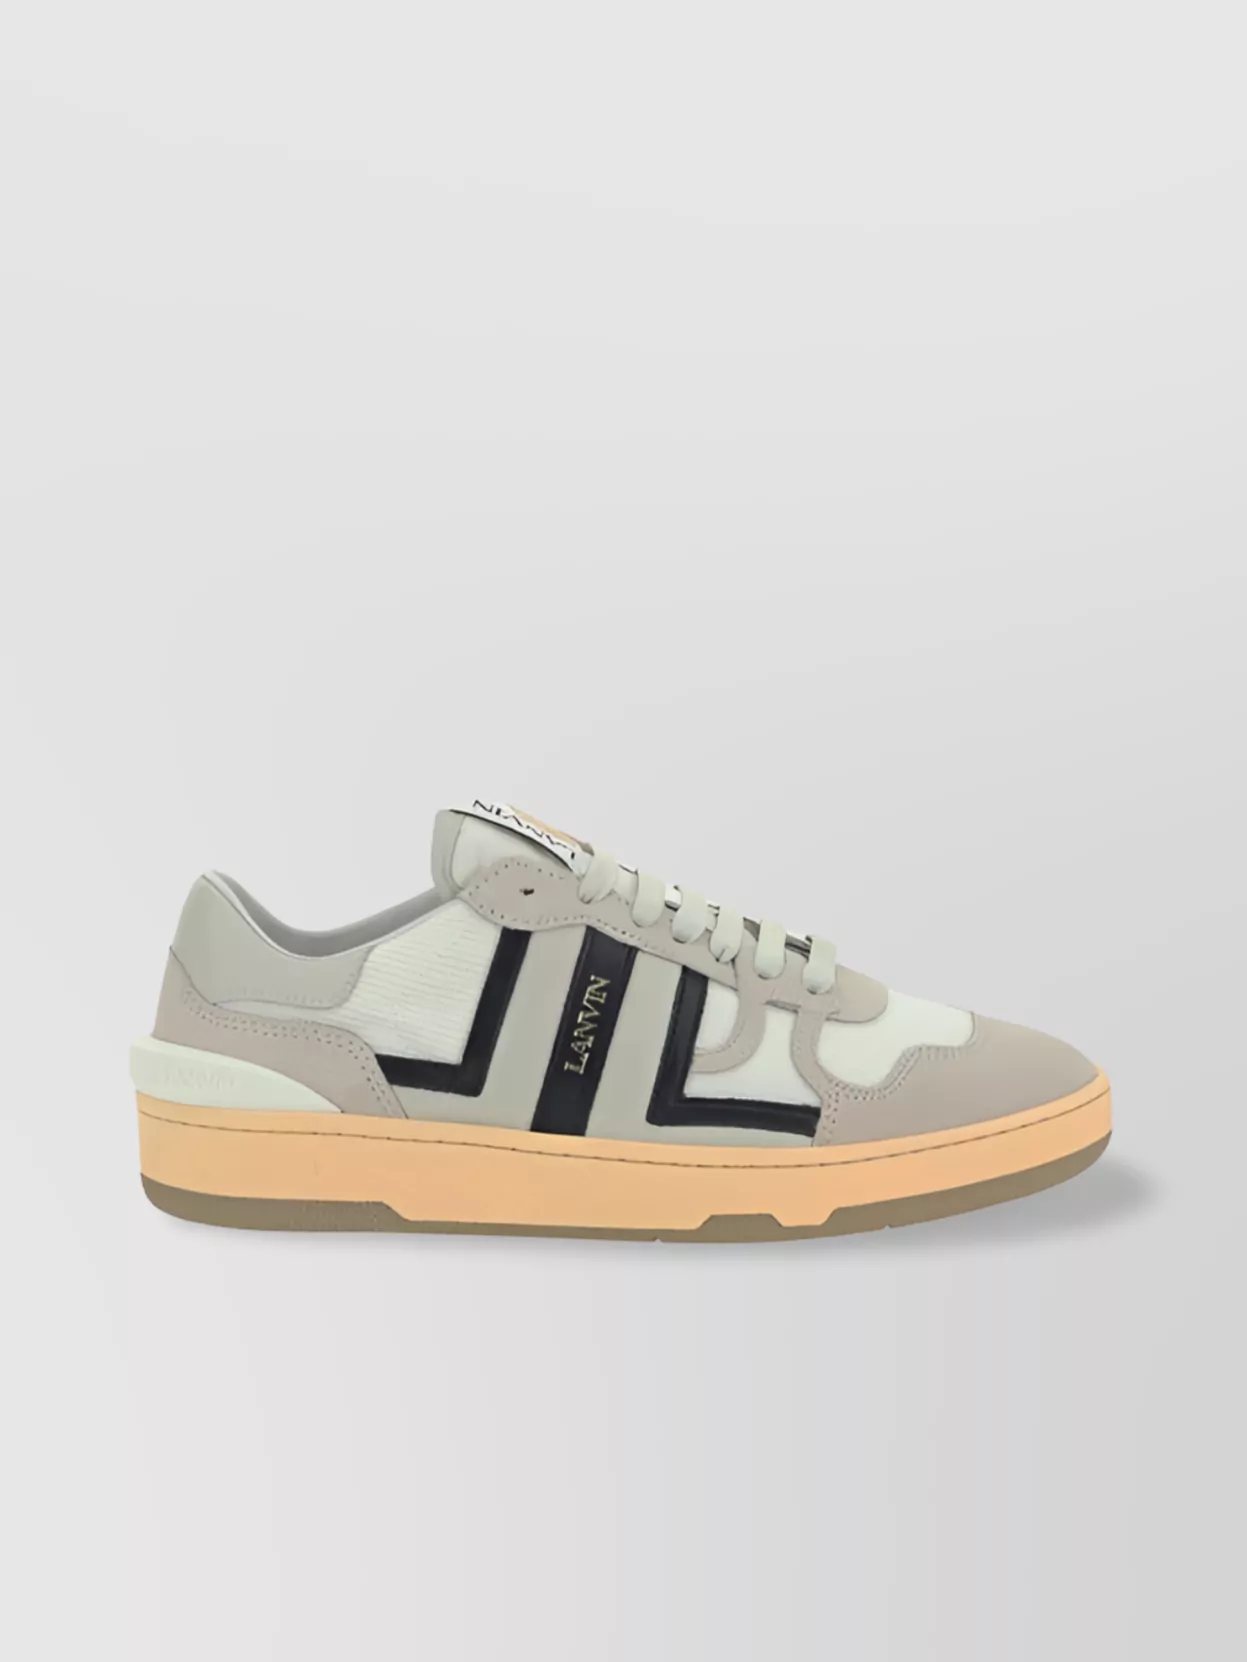 Lanvin Calfskin Panelled Sneakers With Perforated Design In Gray